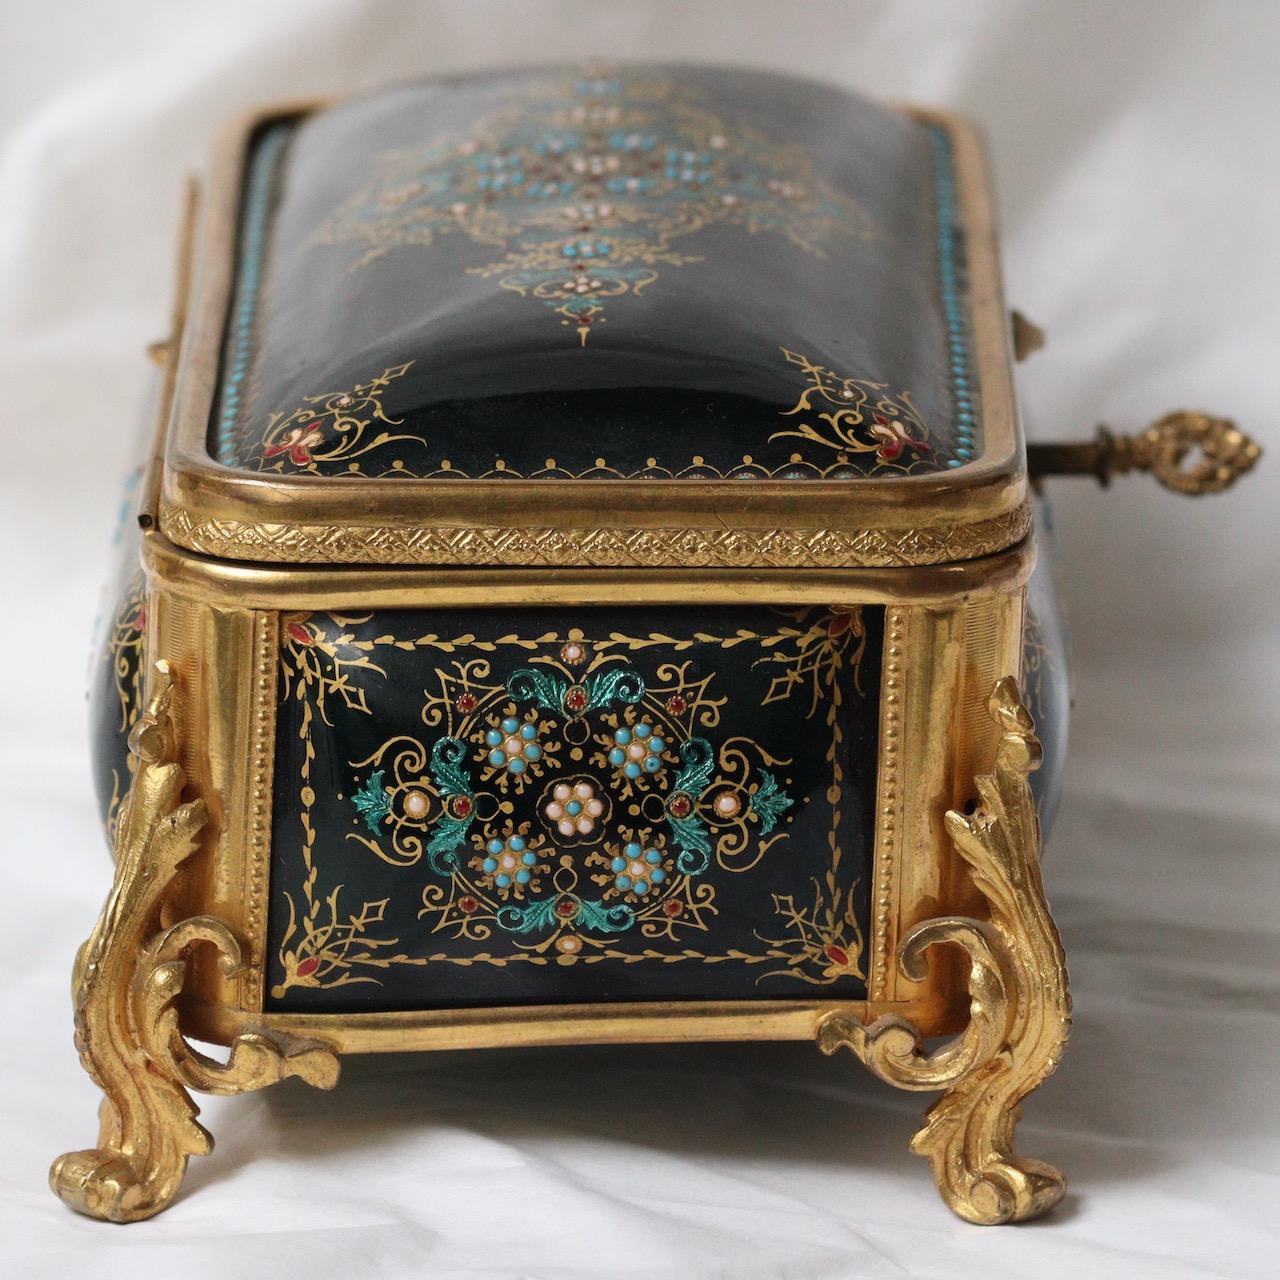 19th Century French Enamel and Ormolu-Mounted Jewelry Casket 2